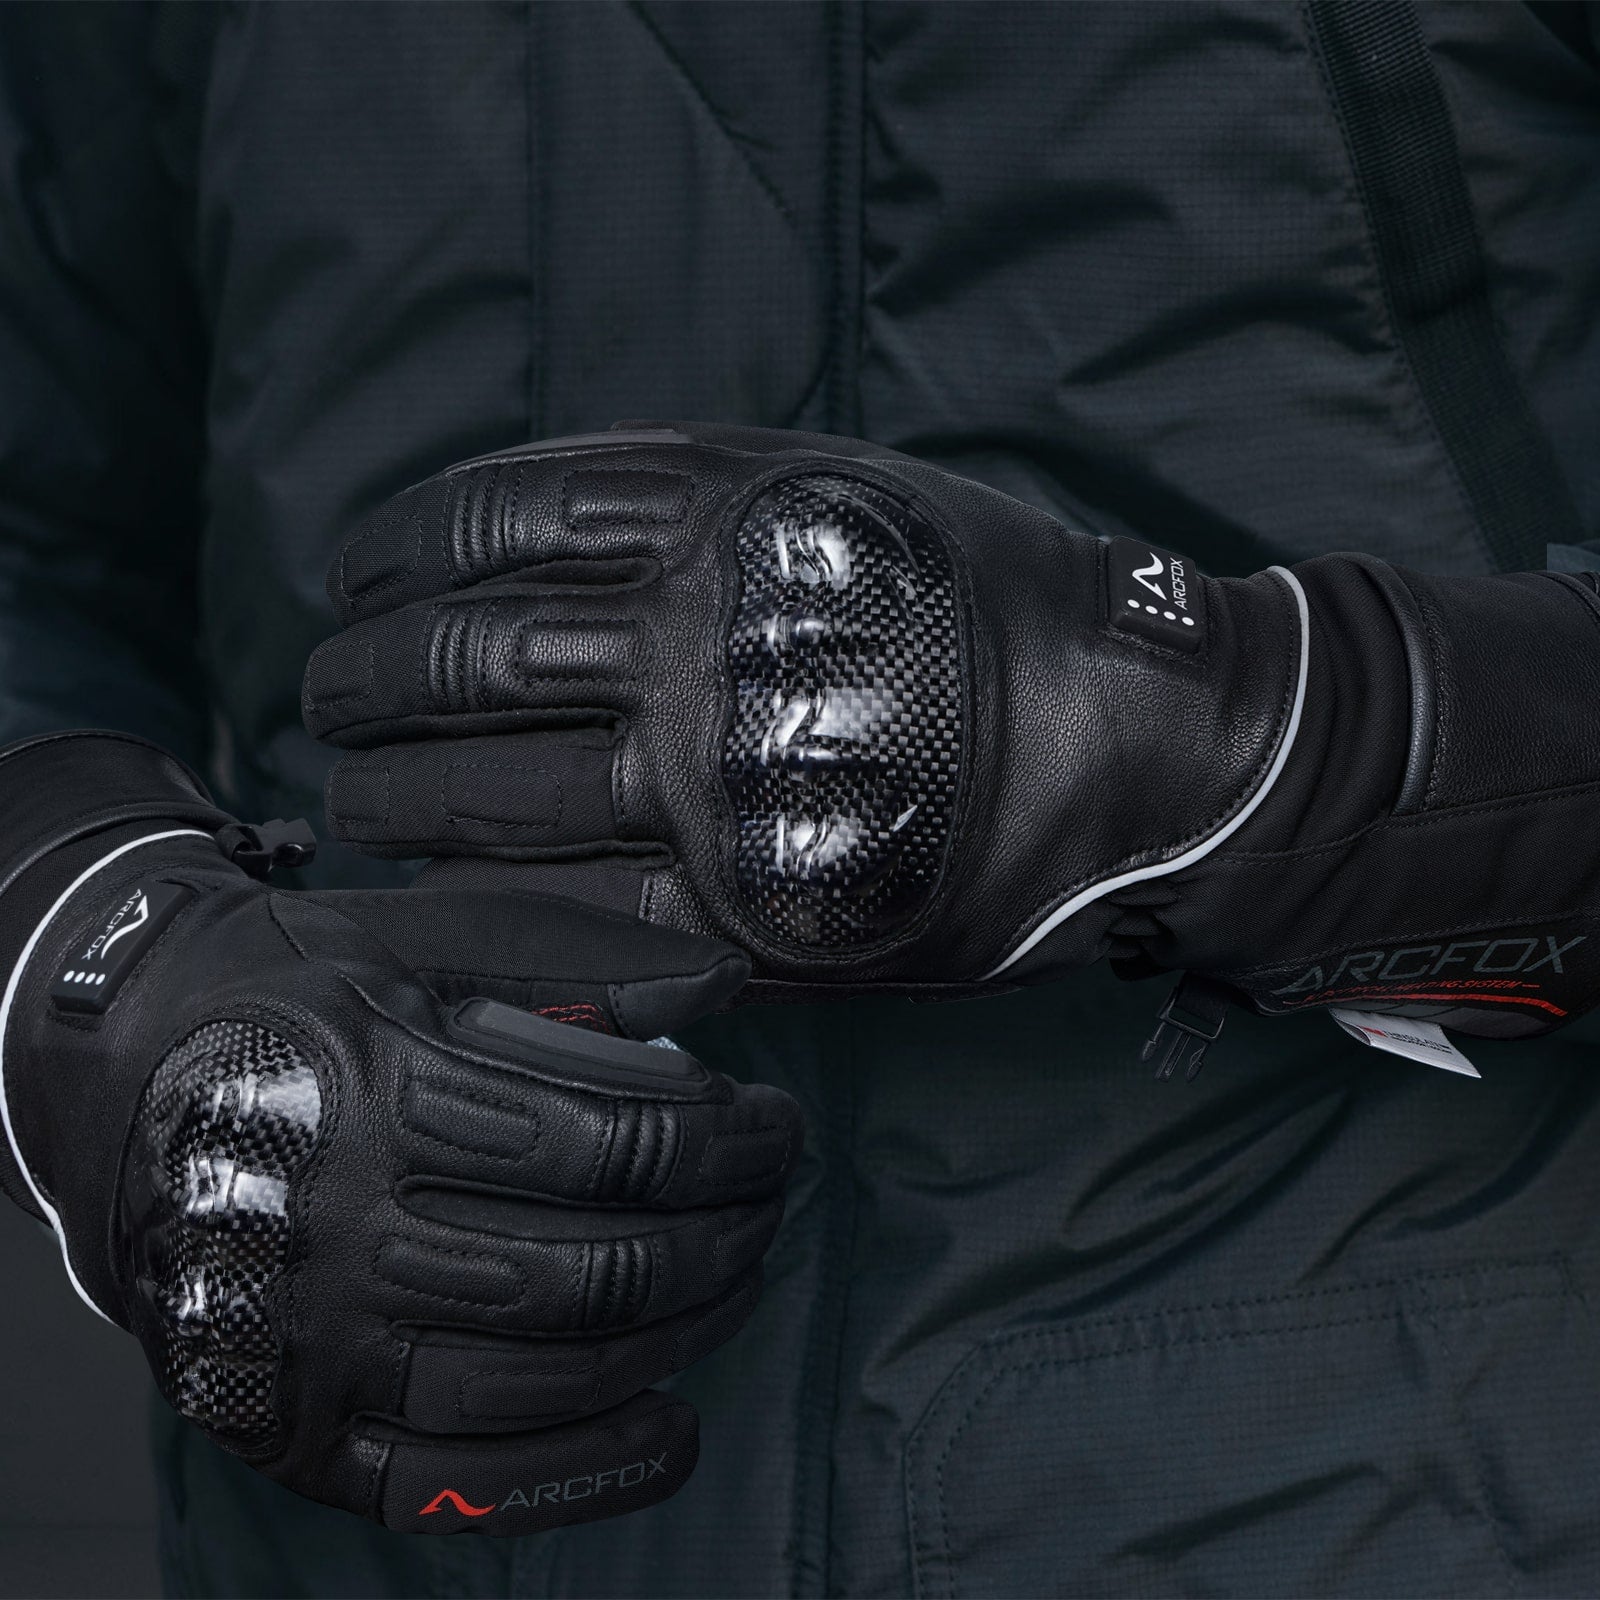 Upgraded Electric Heated Gloves Motorcycle Waterproof Snowproof Anti-Slip Touch Screen Carbon Fiber Shell Protective